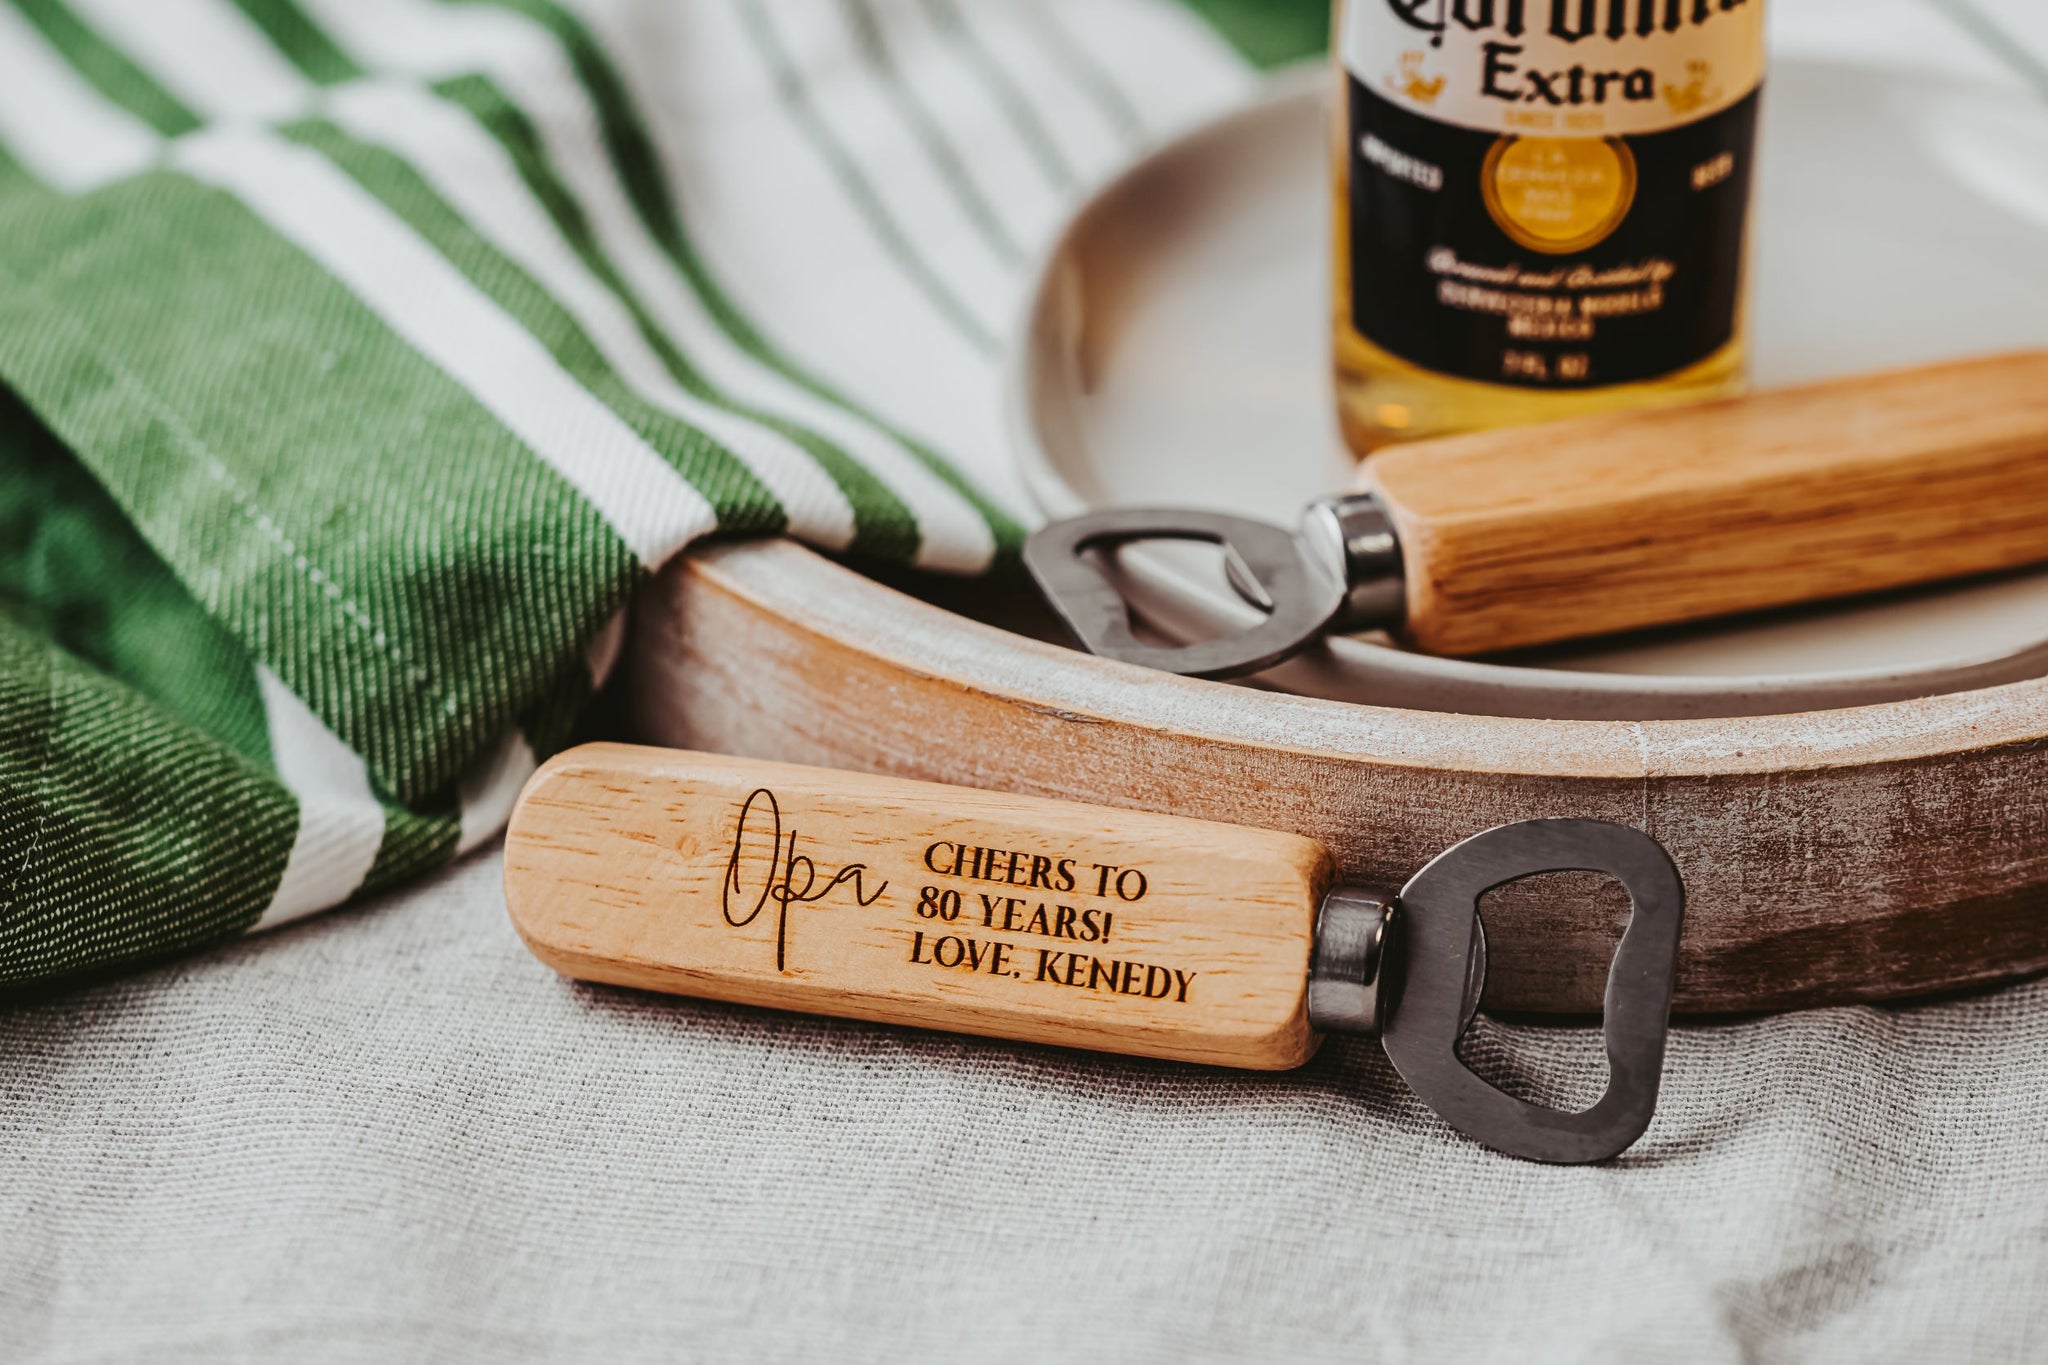 Cheers To 80 Years Wooden Handled Bottle Opener Gift For Grandpa Opa, Personalized Gift For Opa Birthday 70 60 50 40 30 years